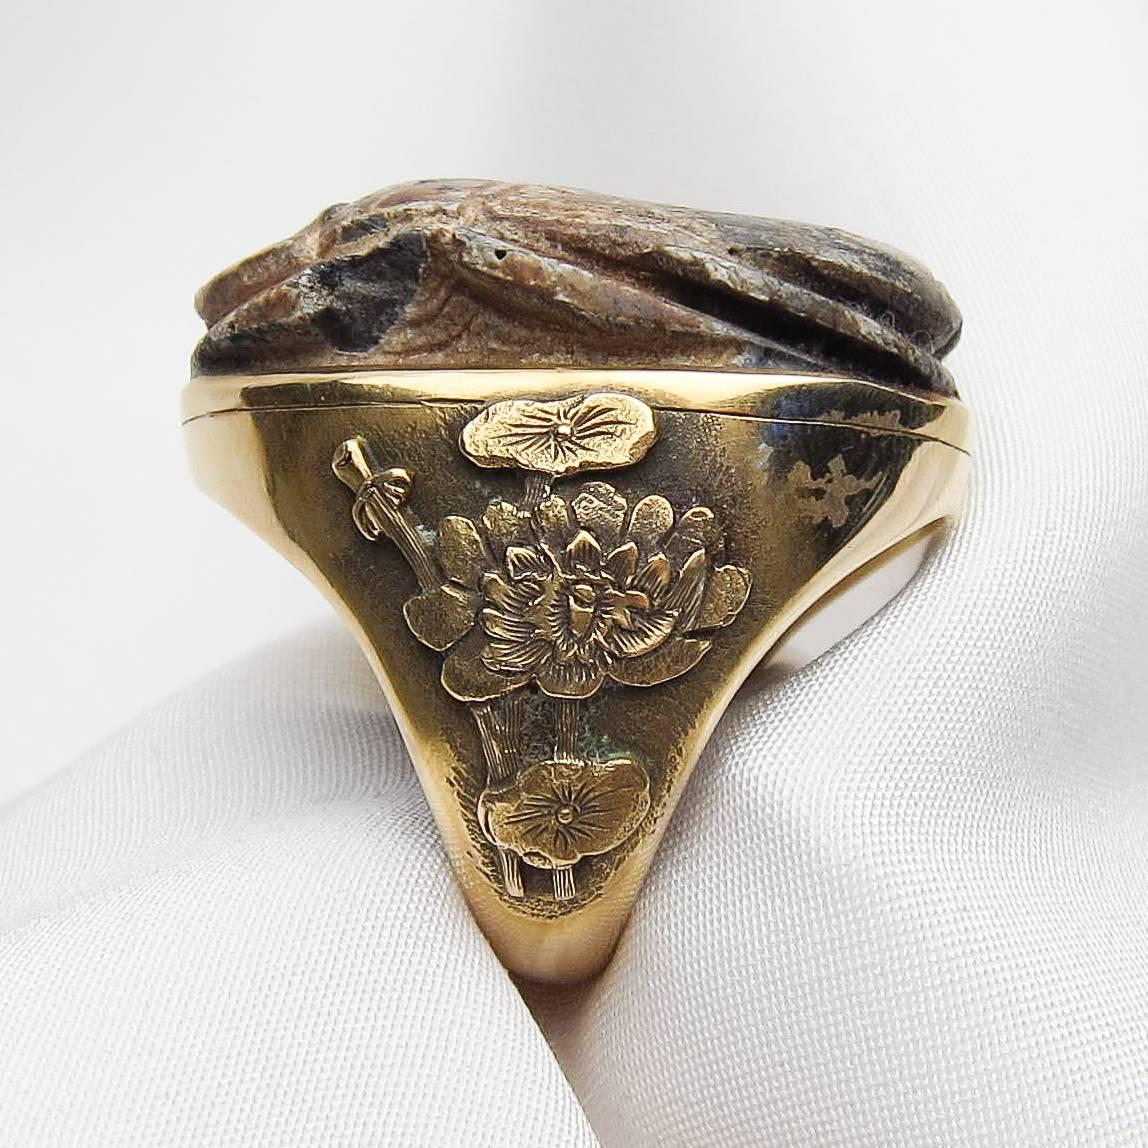 Circa 1880. This amazing Victorian cocktail ring features a large carved scarab made from a non-clay, glazed ceramic material similar to glass, also known as 